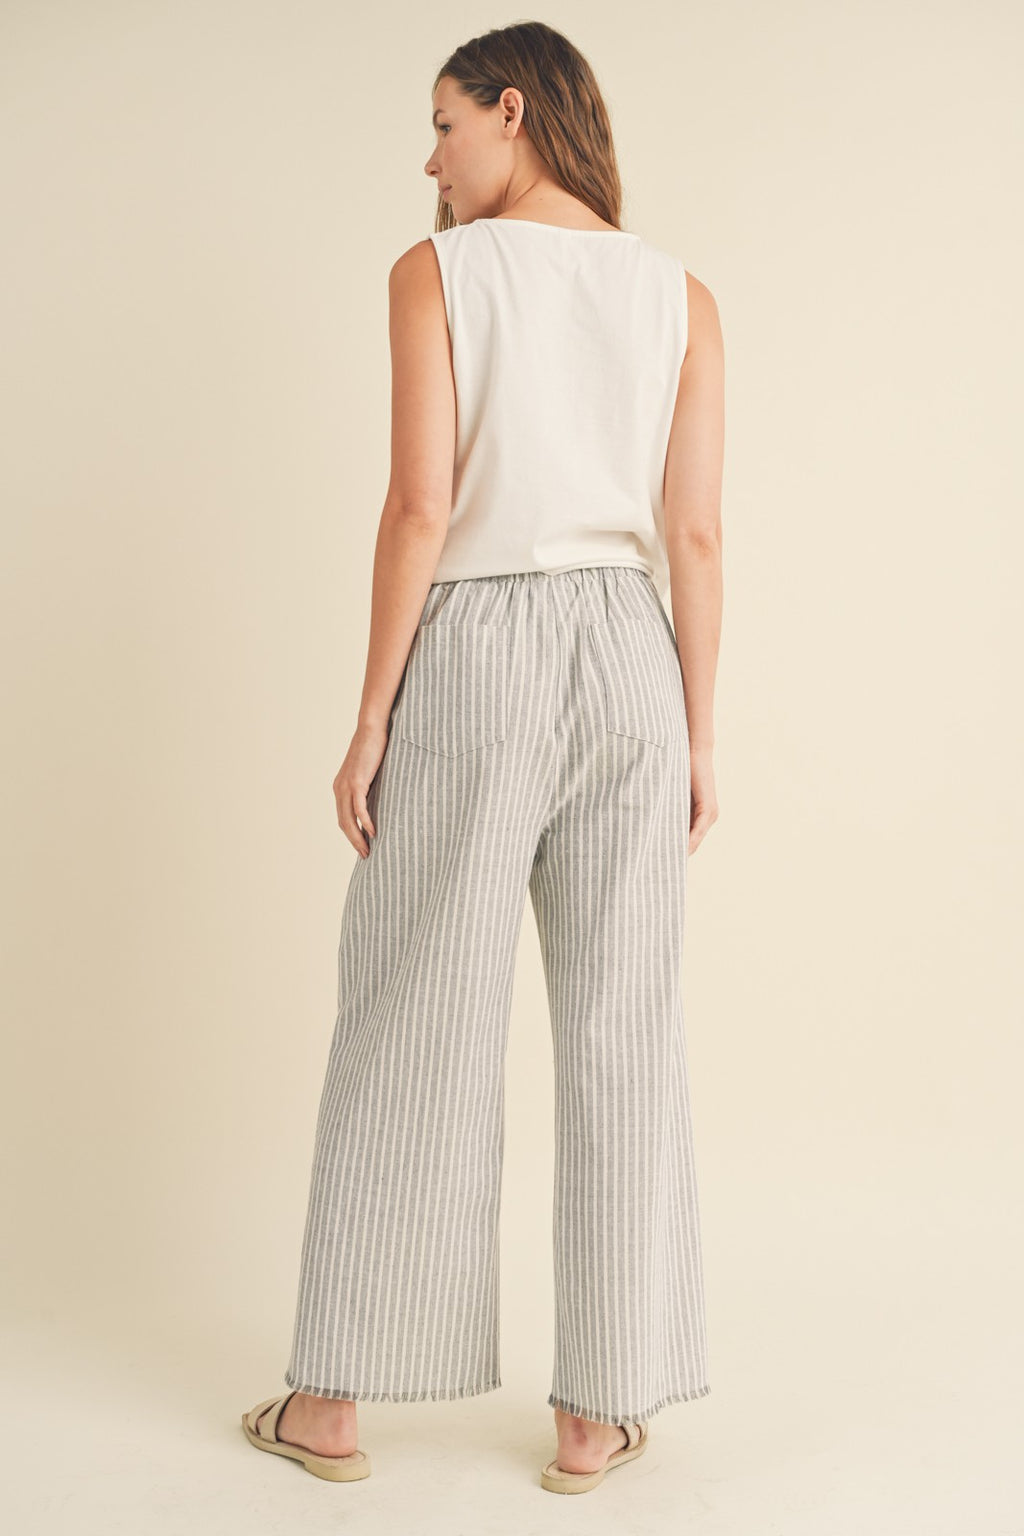 pinstripe linen pants with a high rise elastic waist, raw hemline and dual front pockets